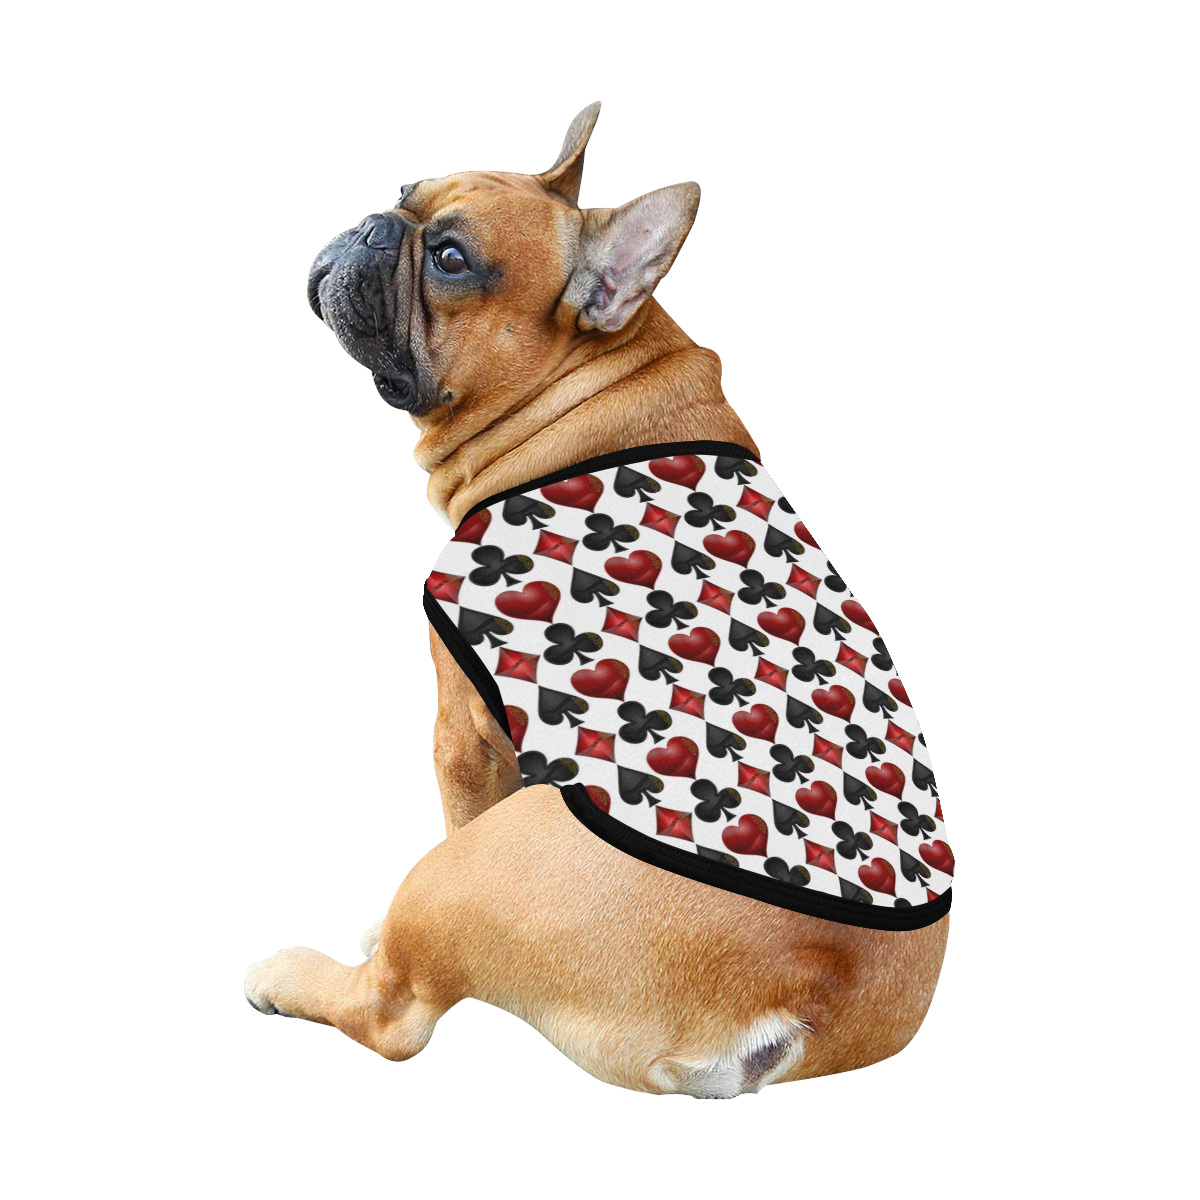 Las Vegas Black and Red Casino Poker Card Shapes on White All Over Print Pet Tank Top